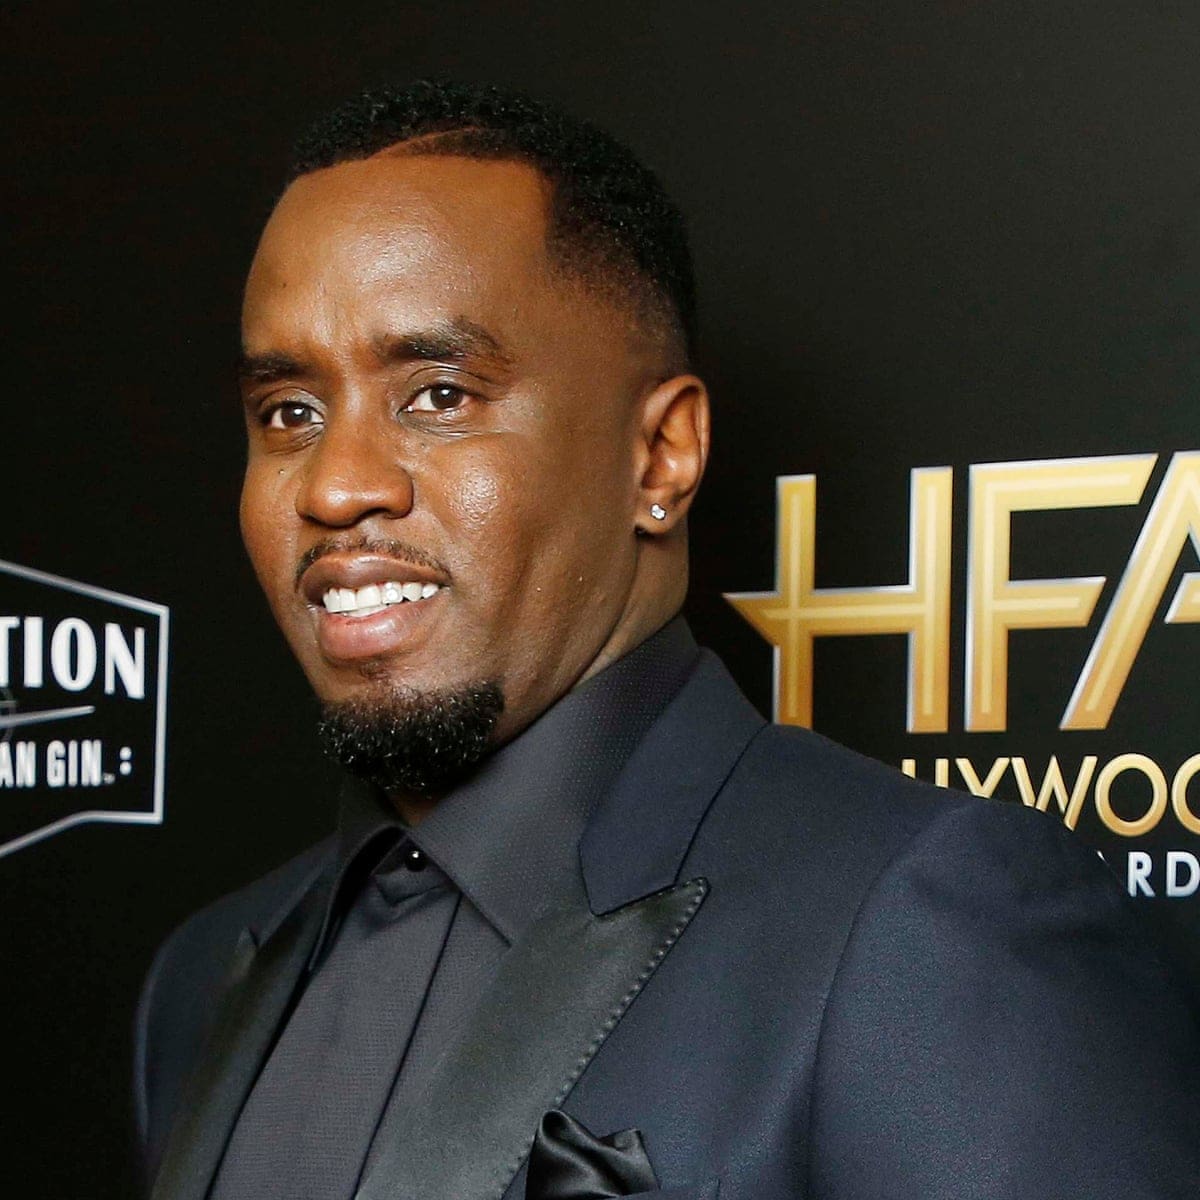 Diddy Praises The Memory Of Cicely Tyson - See This Emotional Video He Shared